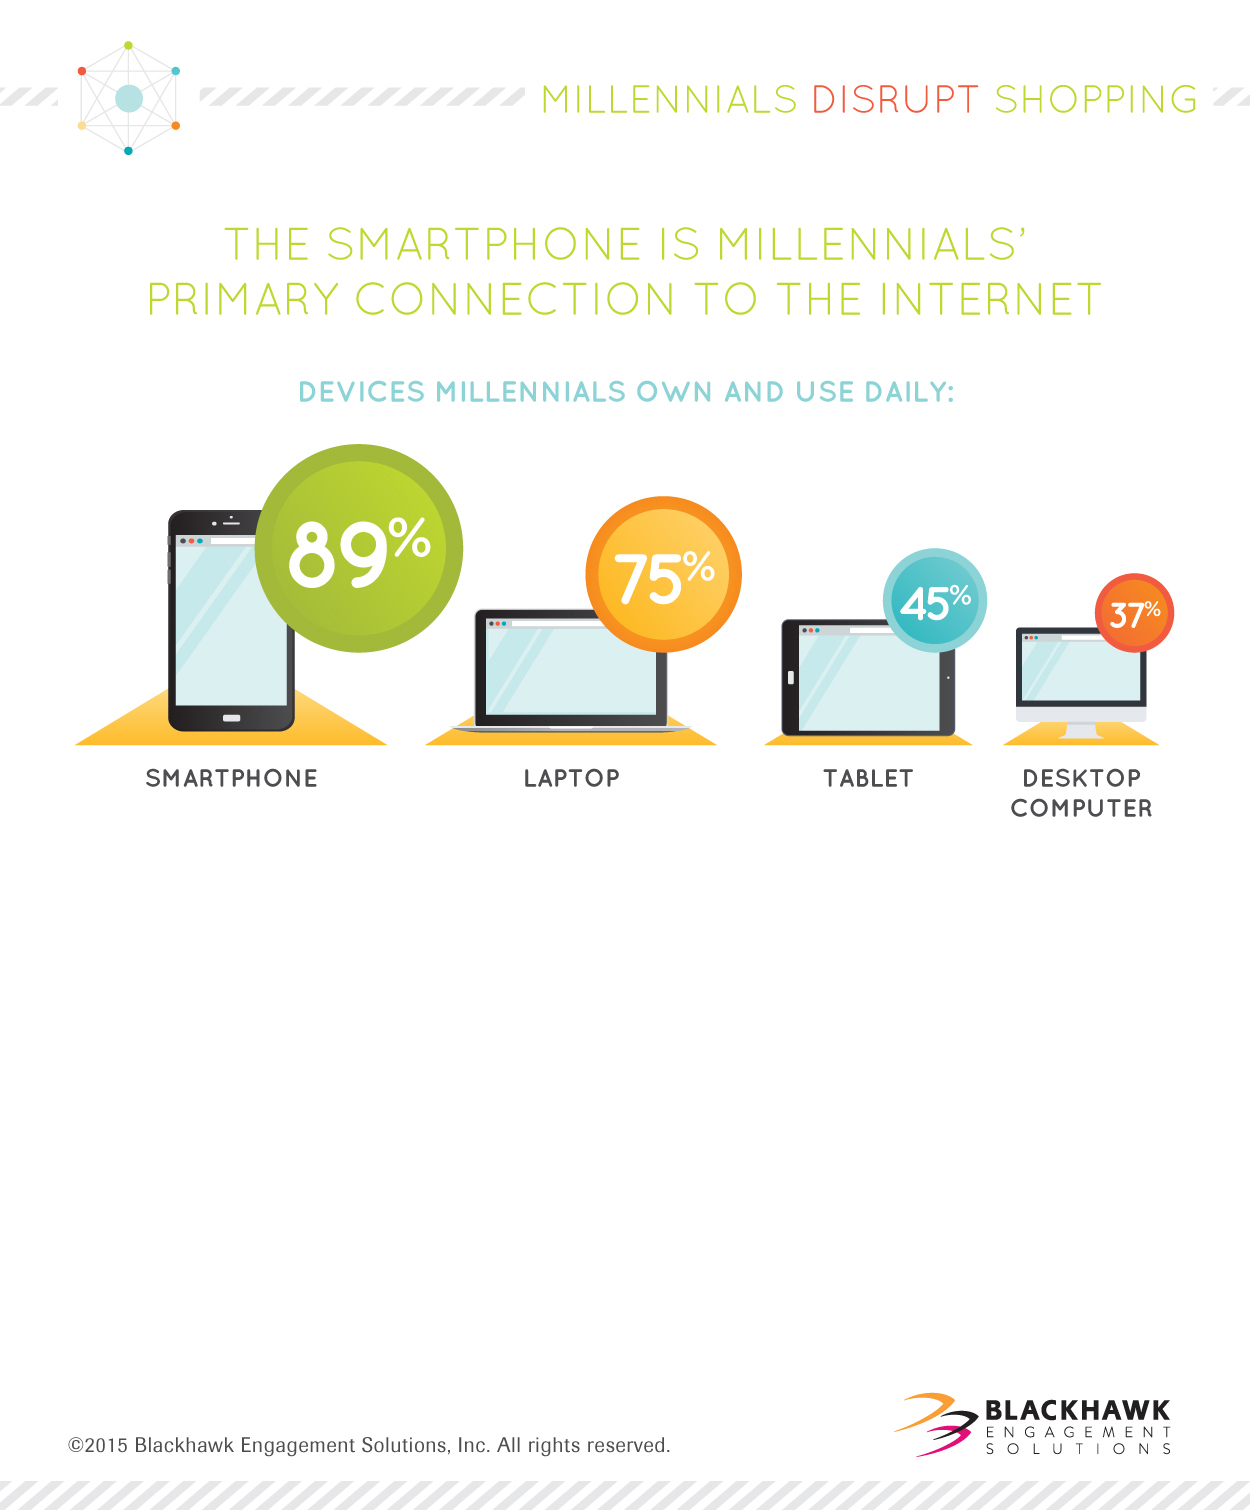 Devices millennials own and use daily include smartphones (89%), laptops (75%), tablets (45%), and desktop computers (37%).